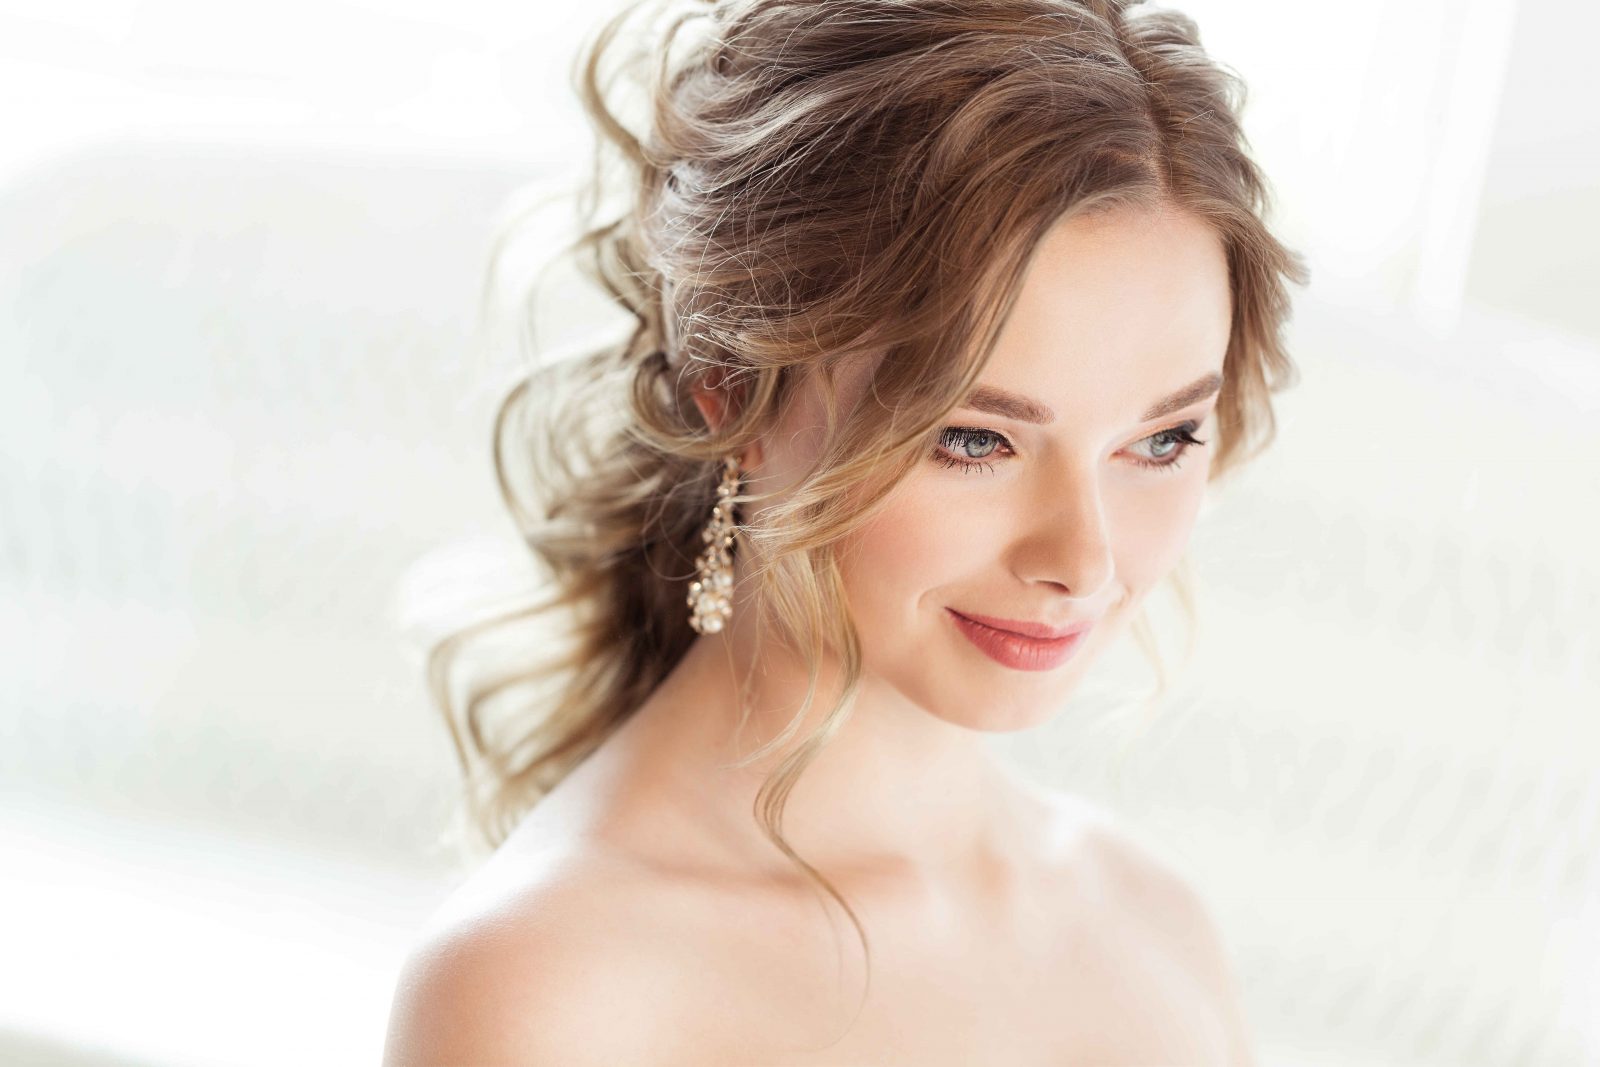 Accomplish A Bridal Glow With These Pre-Wedding Skin Treatments - Haute ...